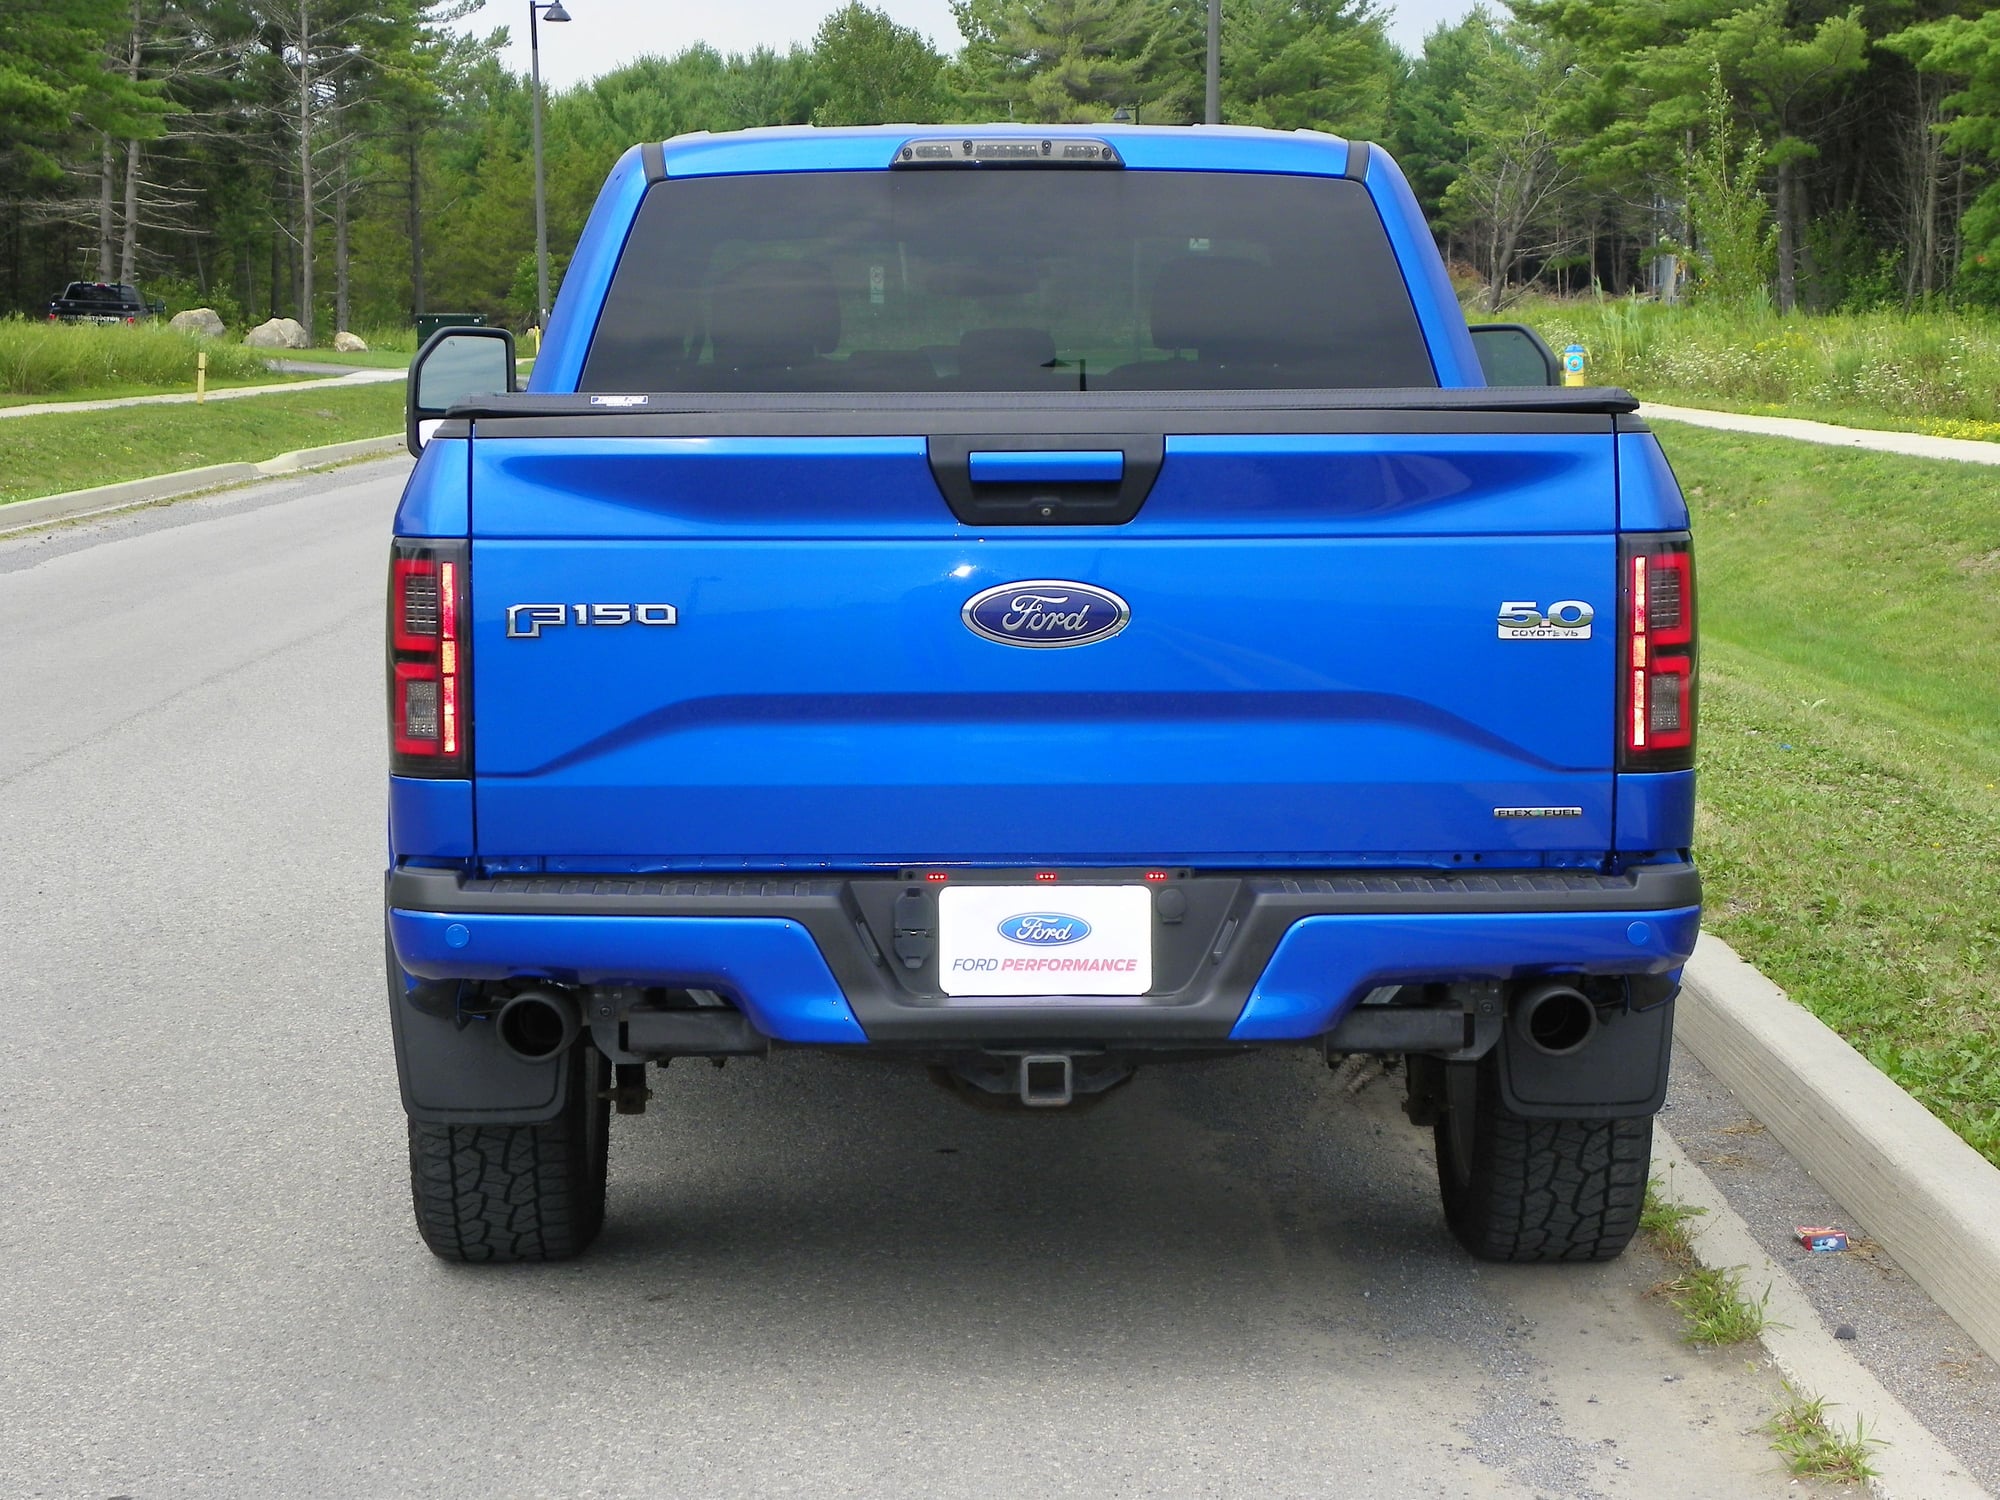 New exhaust exiting under rear bumper? - Page 2 - Ford F150 Forum